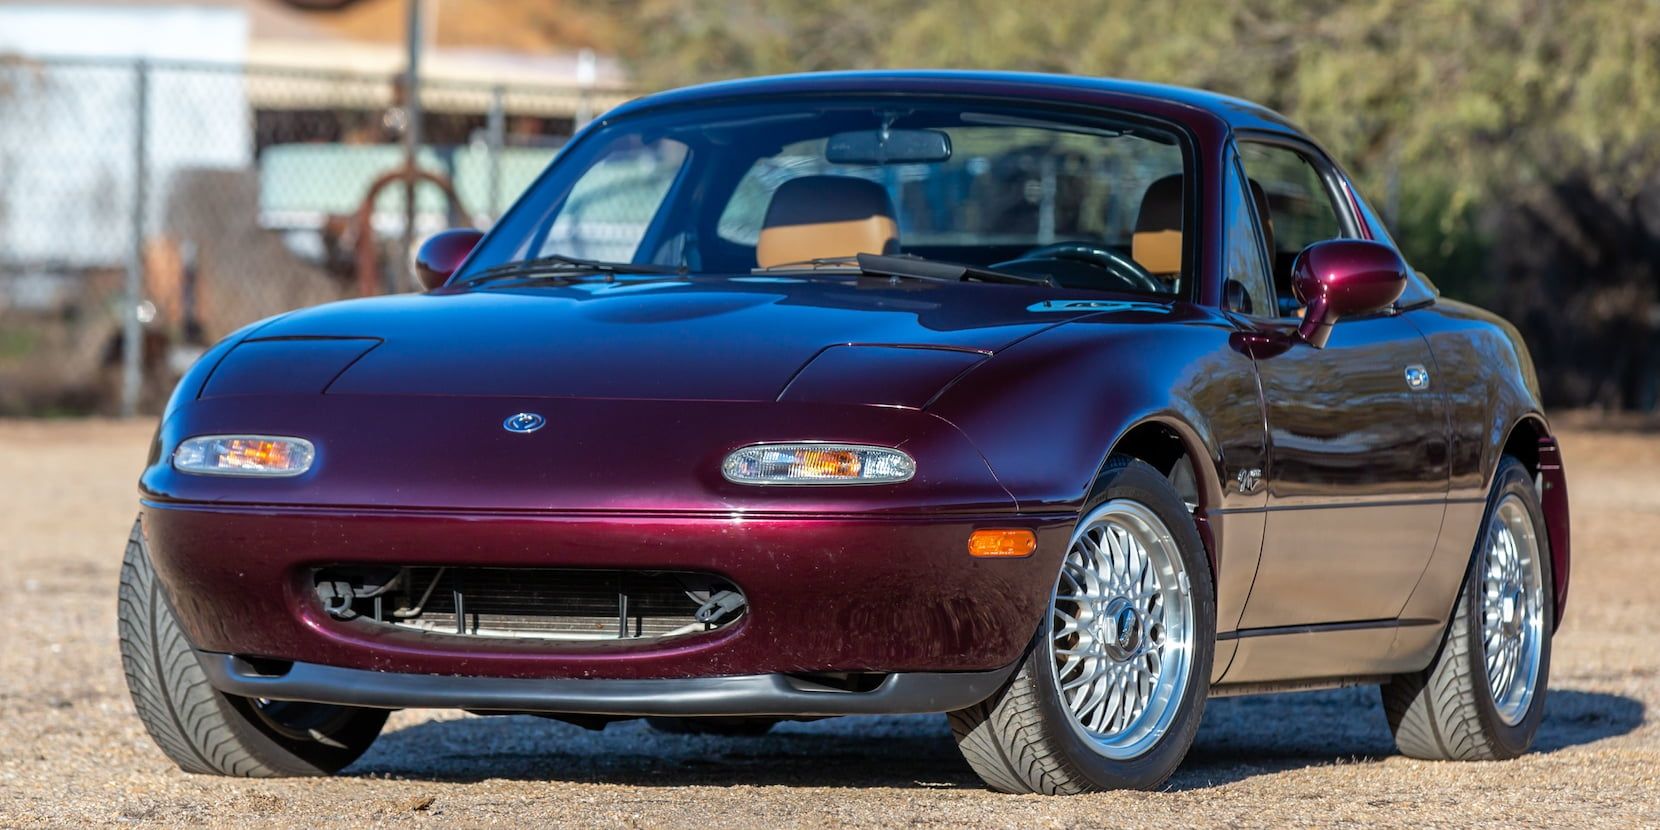 10 Cars People Keep Modifying, But Shouldn’t